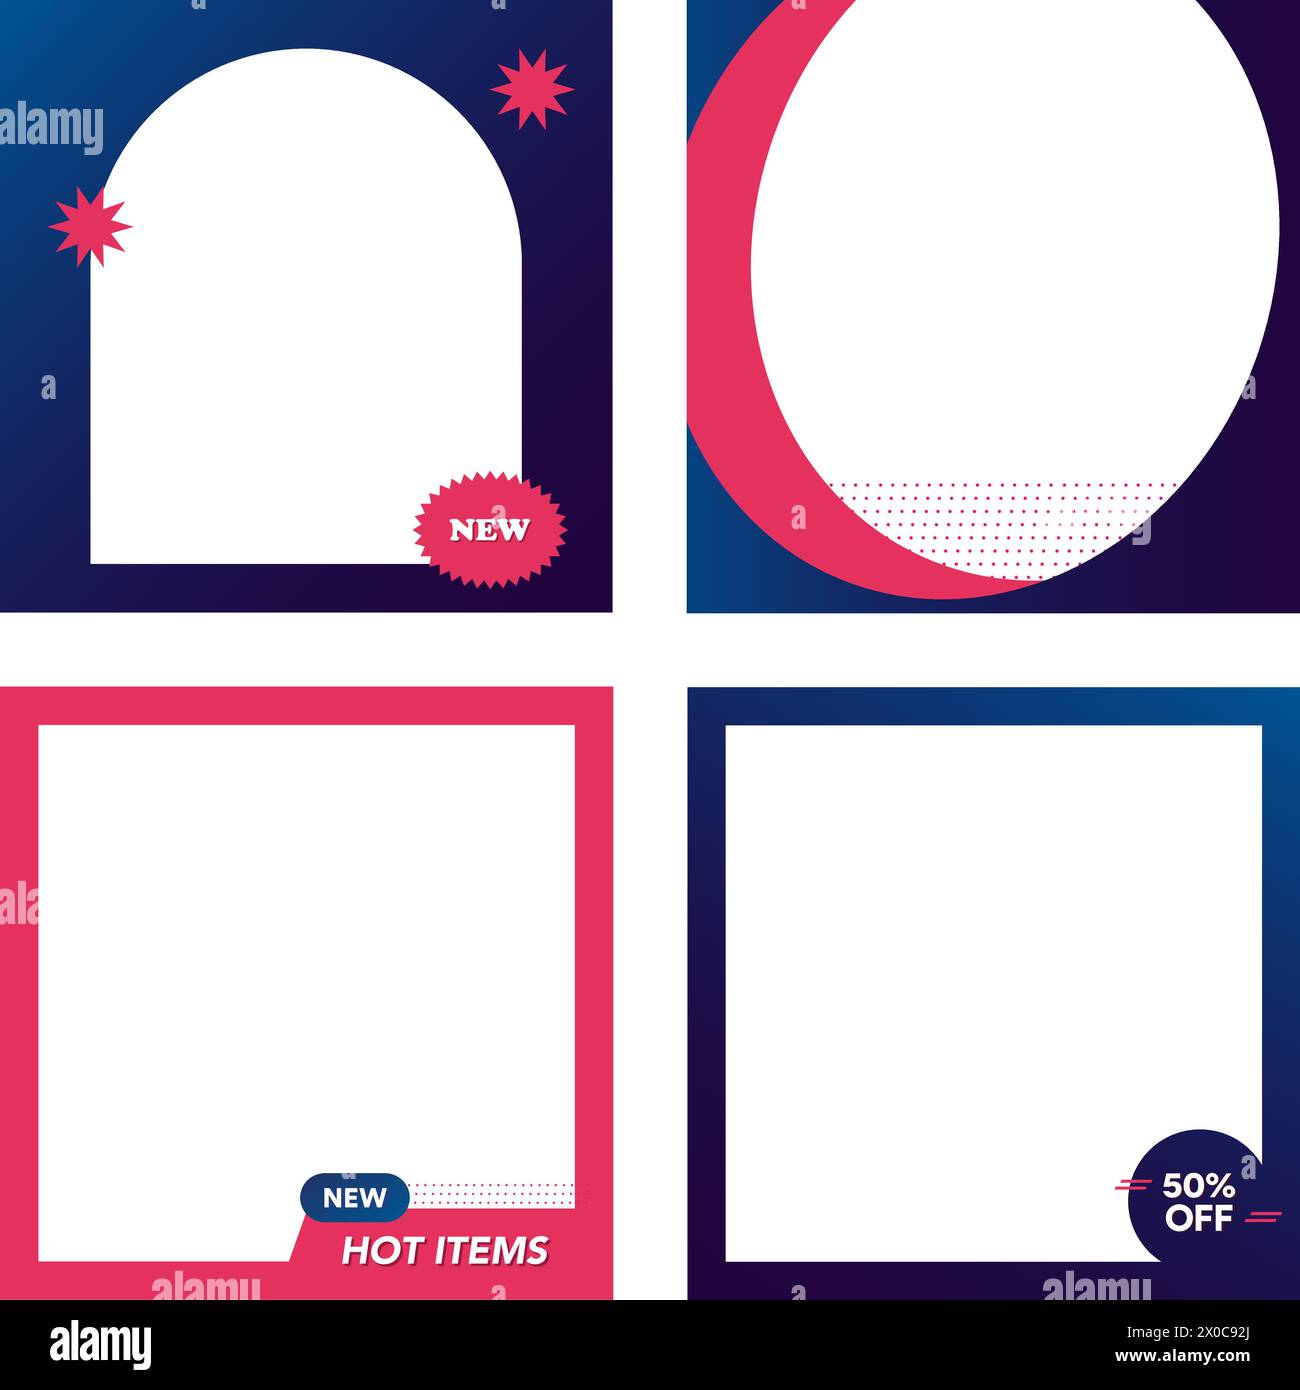 Frame set for promotion, marketing, business, standee, department store, card, print, online shopping, ad template, social media post, poster, banner Stock Vector